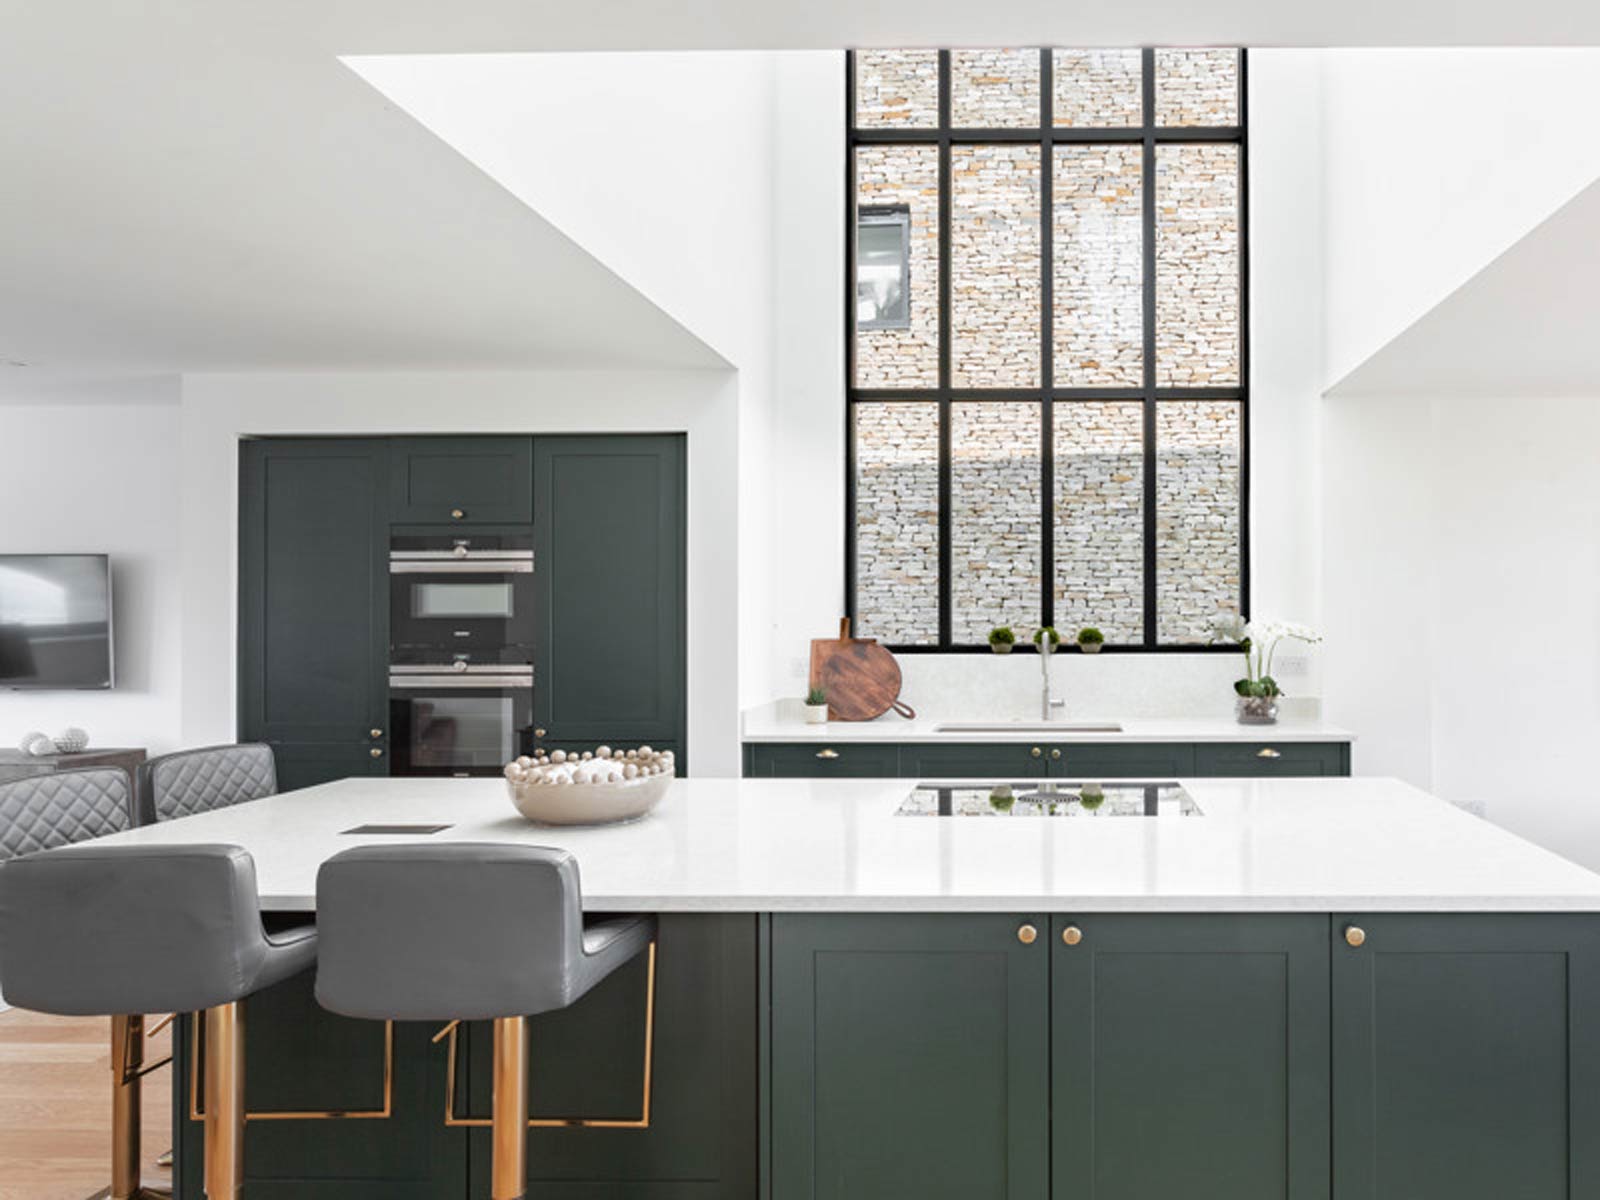 A perfect kitchen with a high, bright ceiling and dark green cupboards